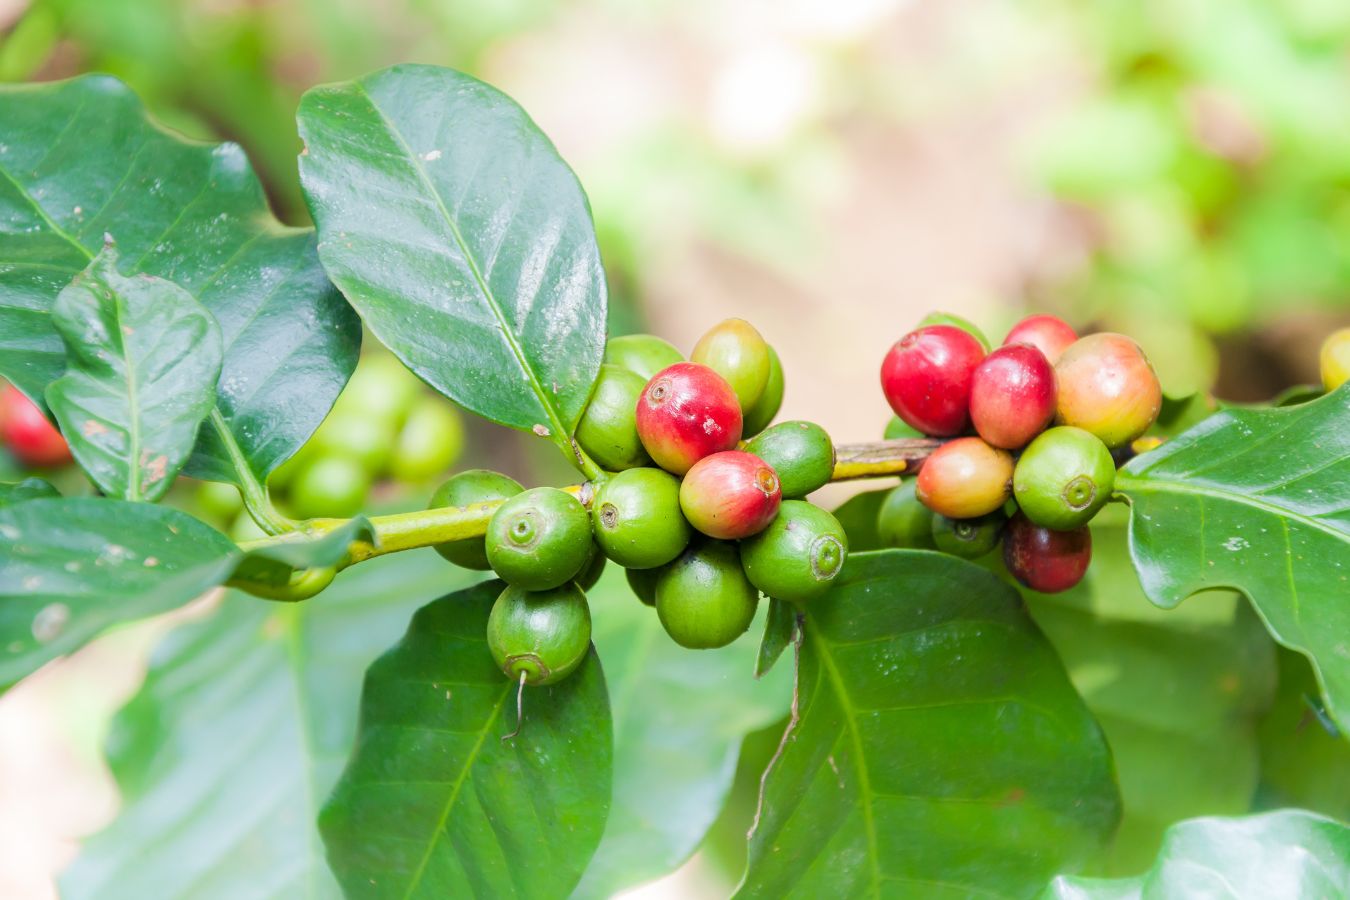 where is arabica coffee from